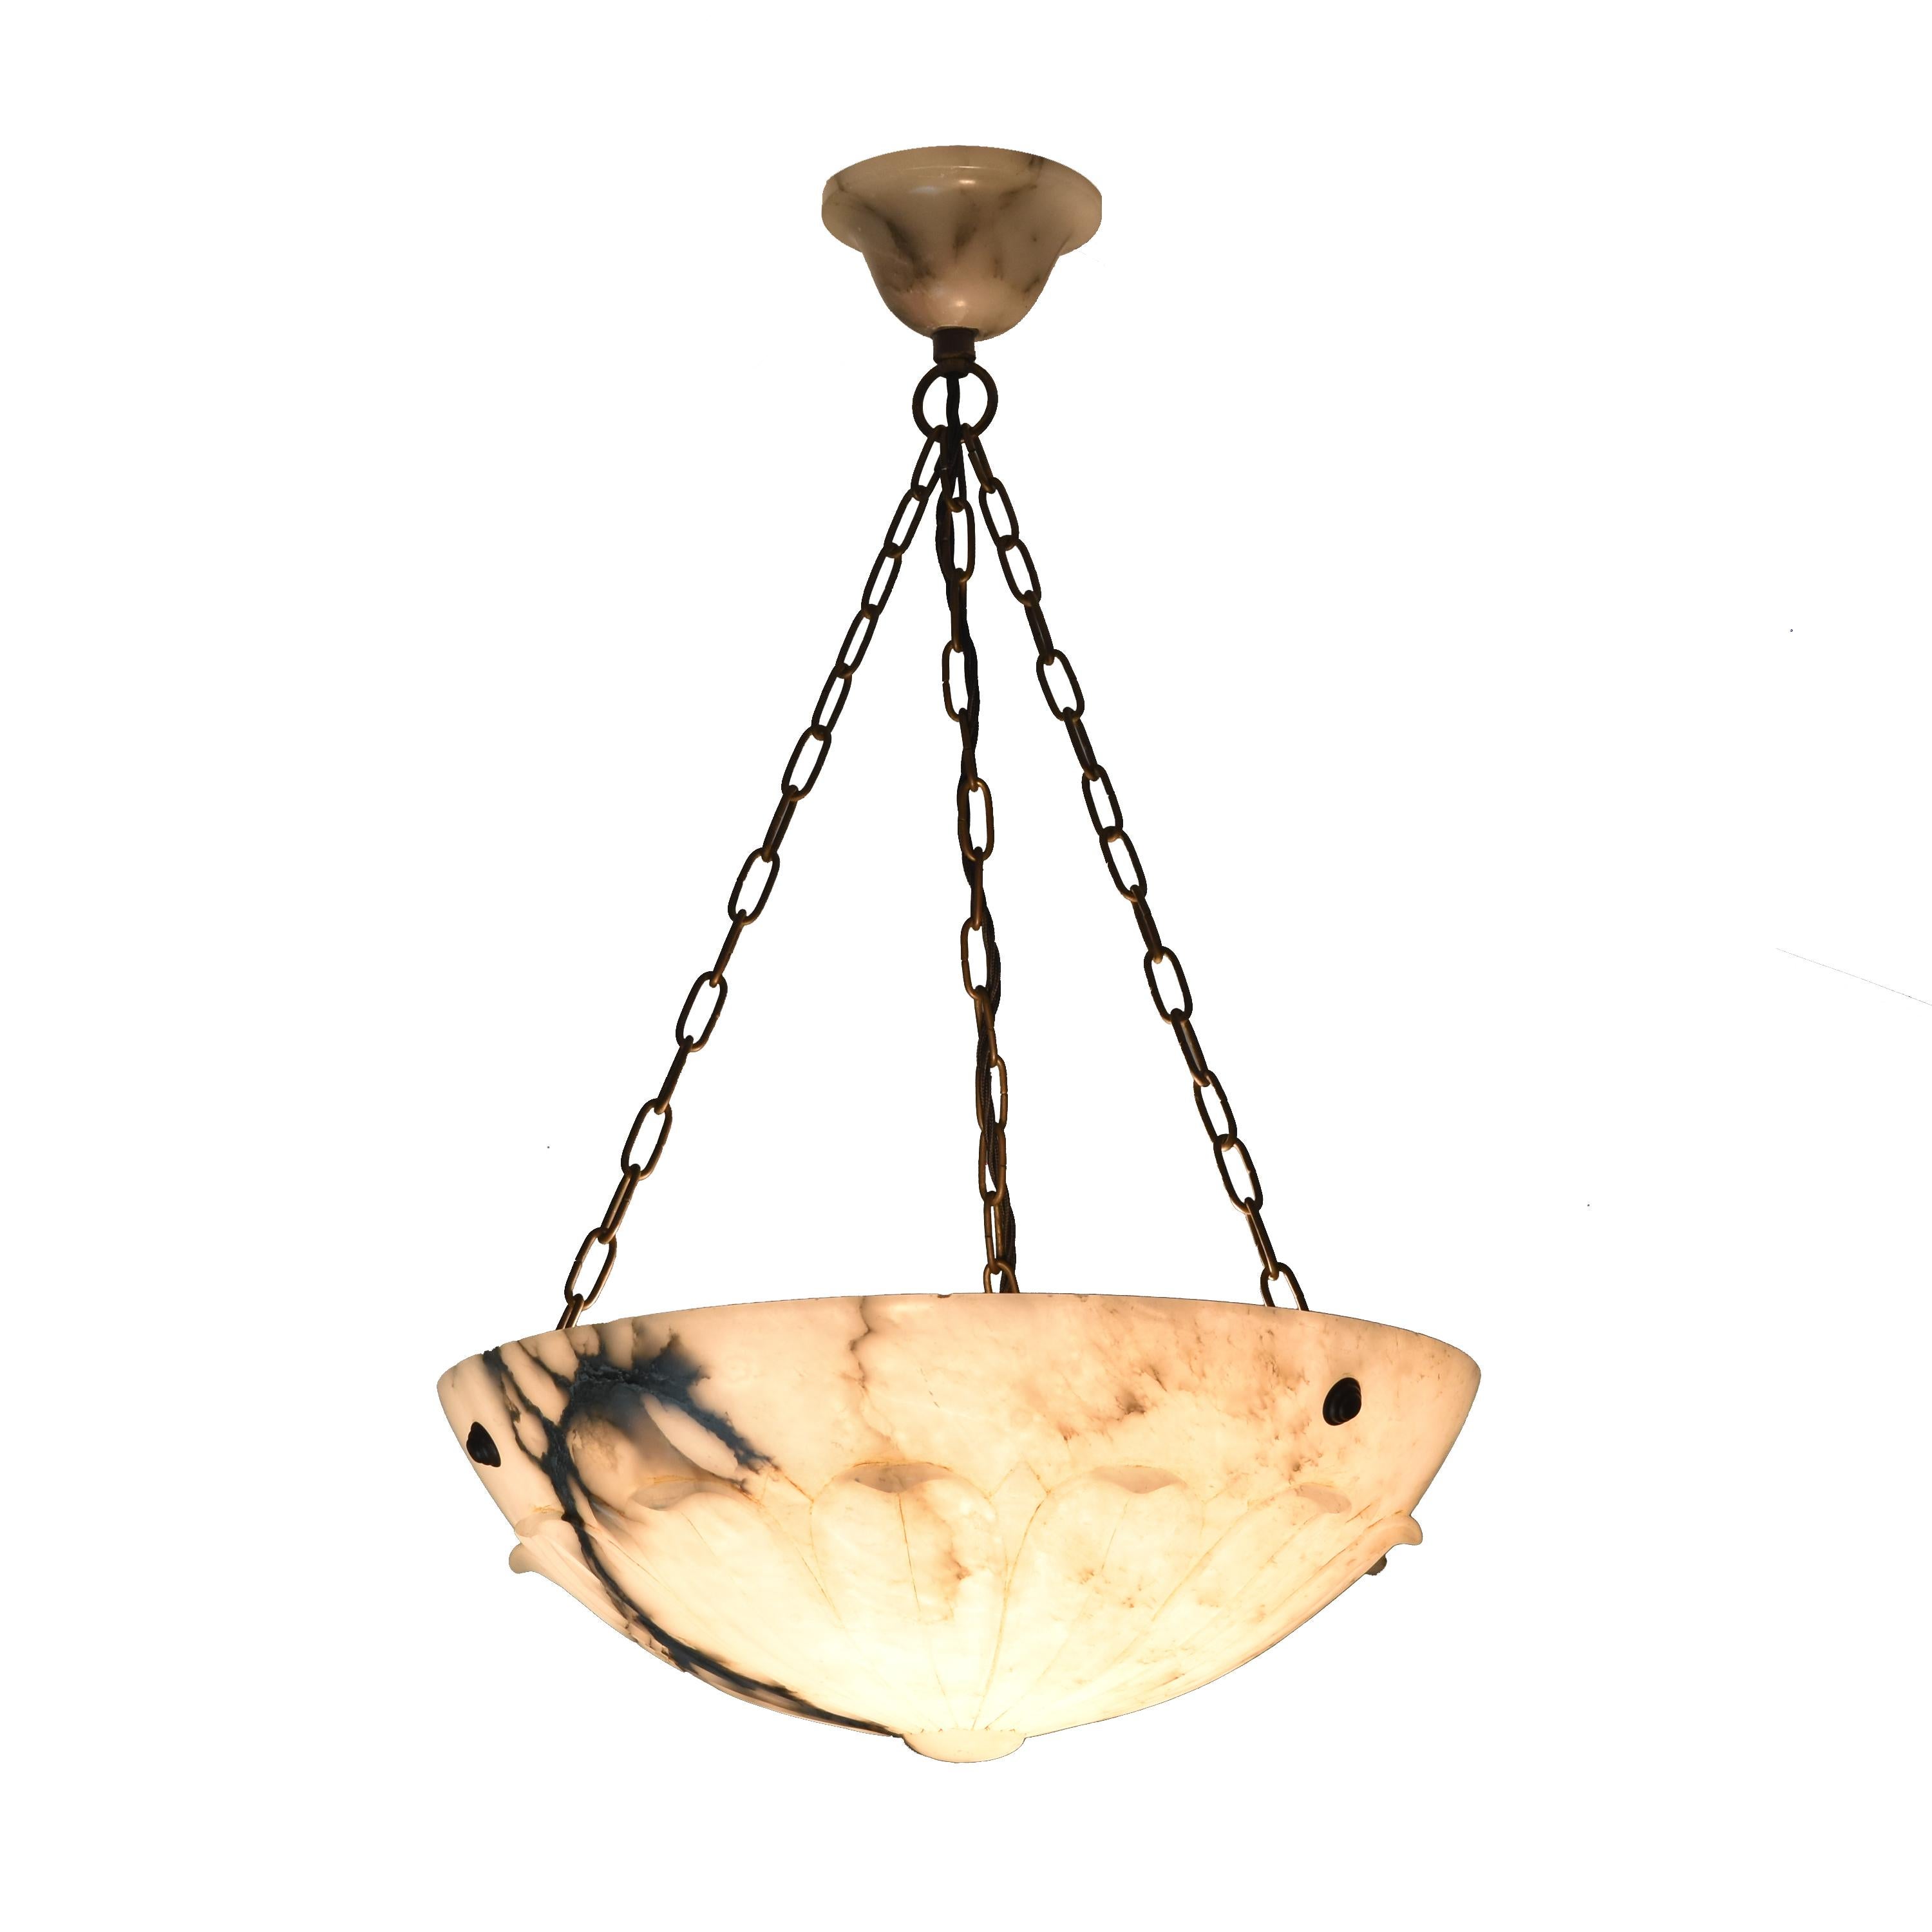 An elegant French Art Deco Alabaster ceiling lamp featuring a carved blossom-like decoration and its alabaster canopy.
This lamp is fitted with an E27 socket and has been newly rewired for the European market.
The finely marbled stone emits a warm